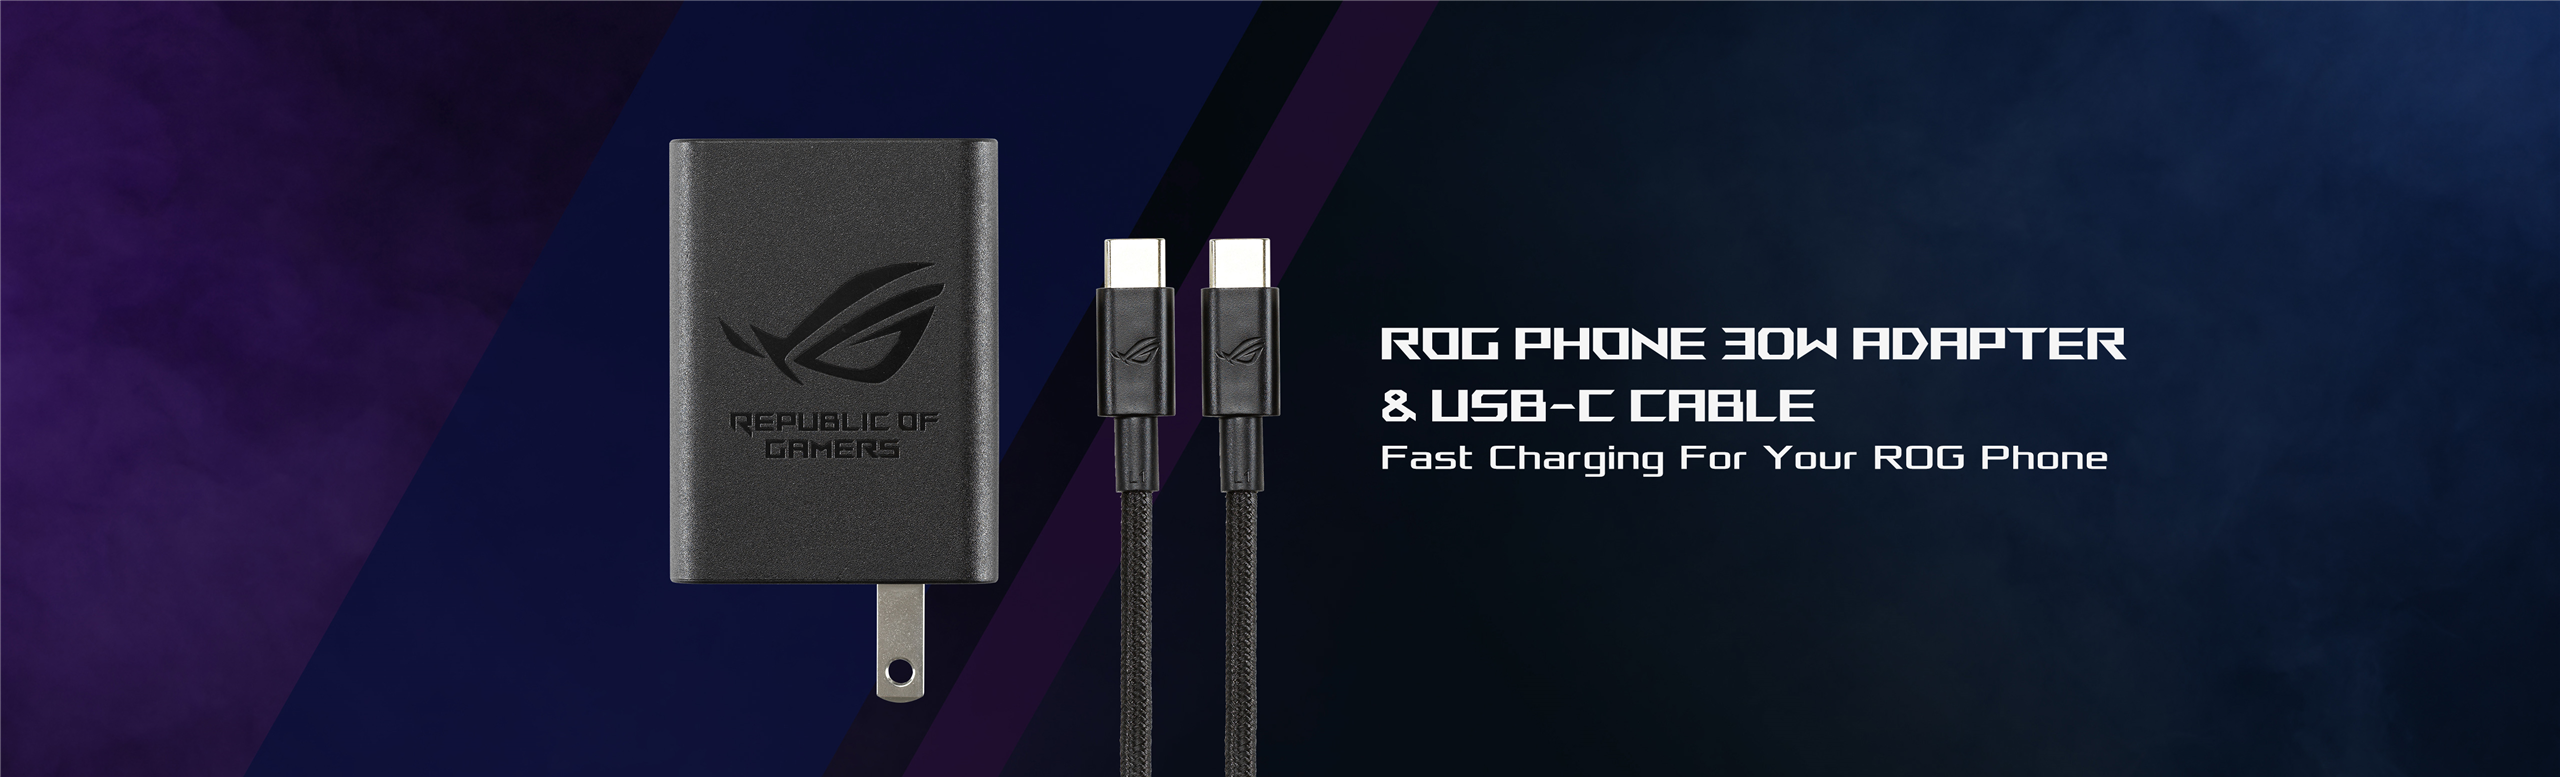 ROG ADP&Chargers